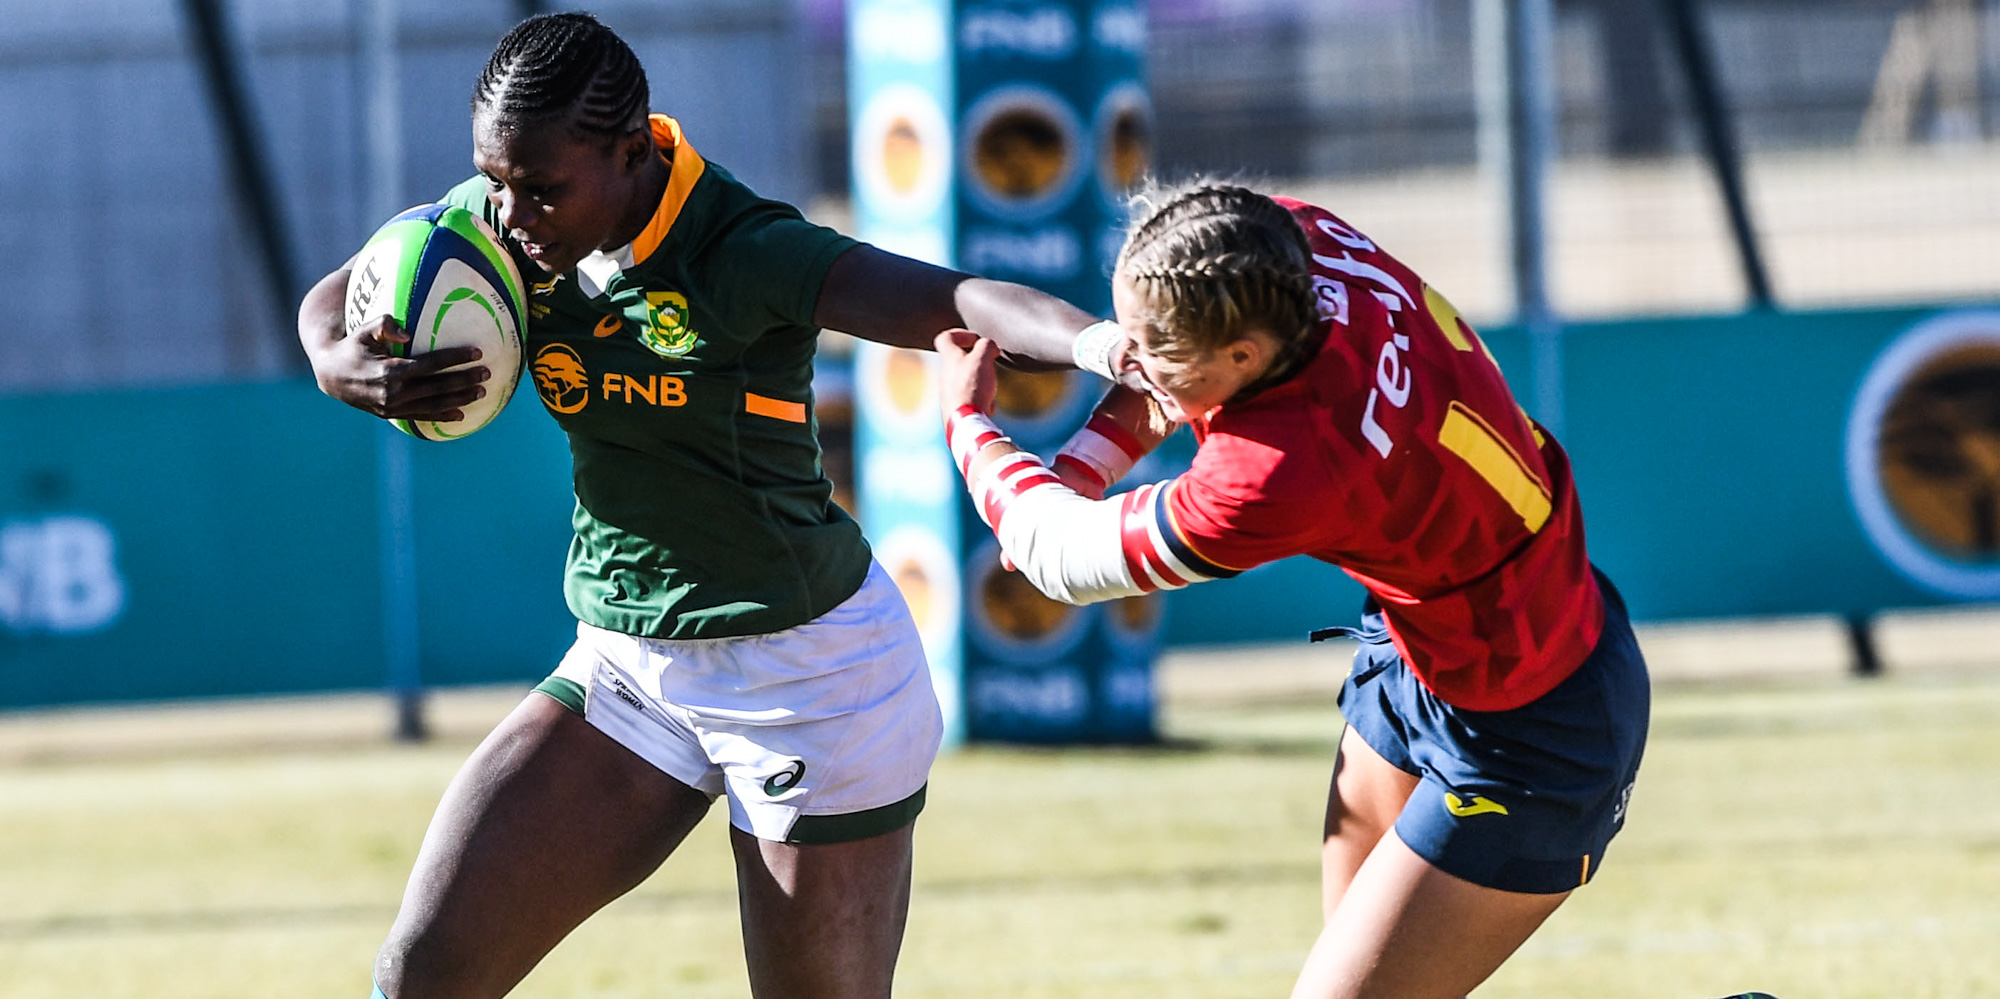 Nomawethu Mabenge on the attack against Spain in Potchefstroom.